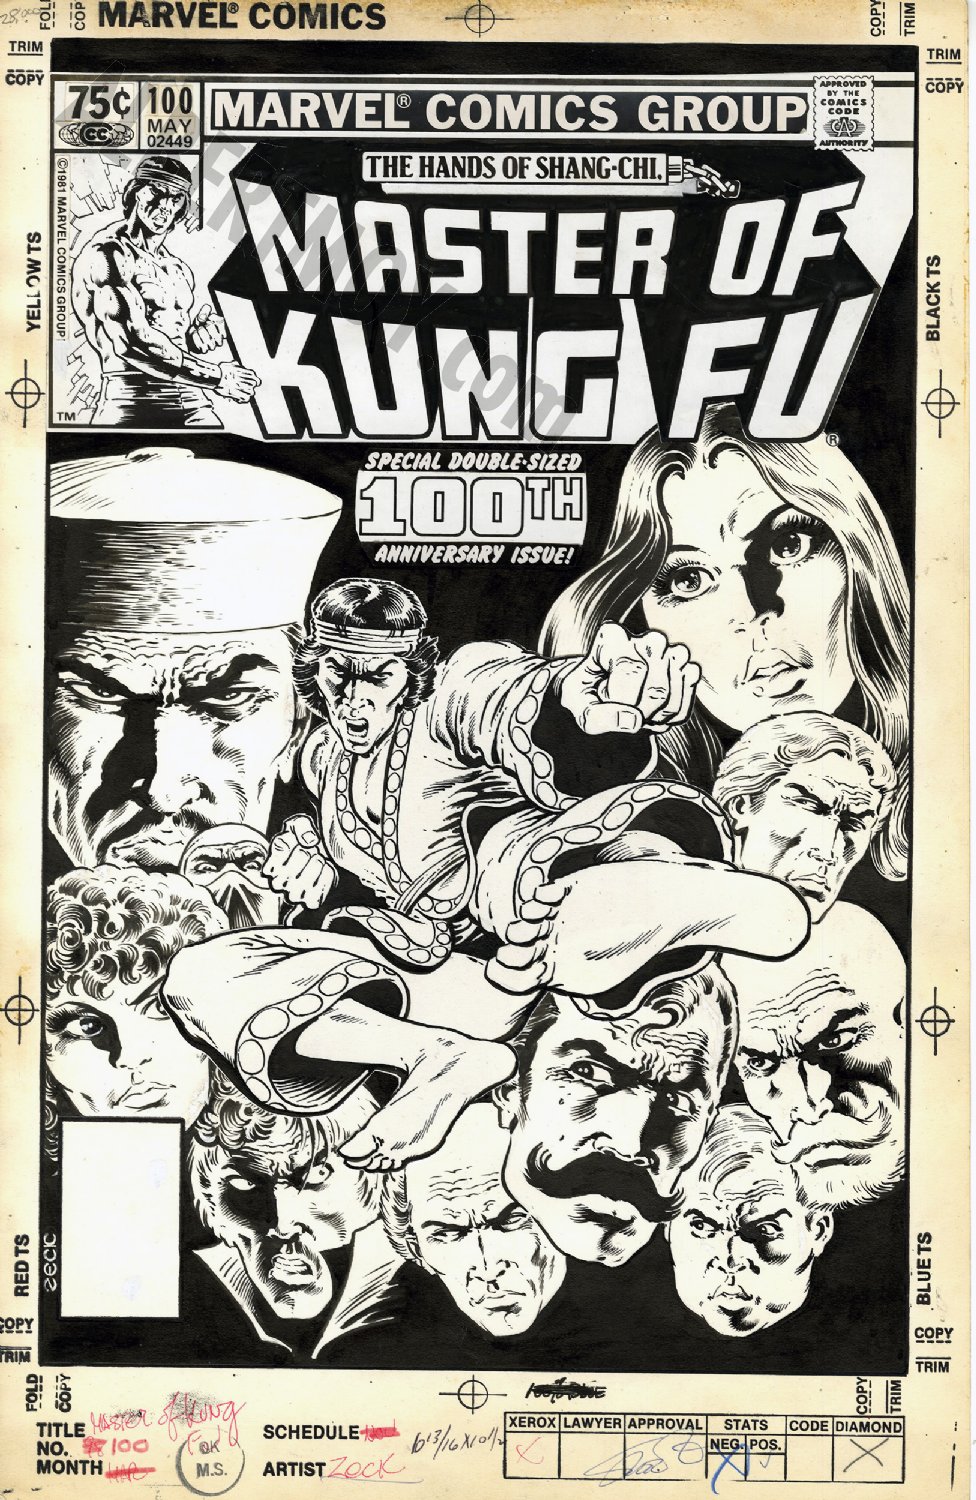 Image of Master of Kung Fu Issue 100 Page Cover